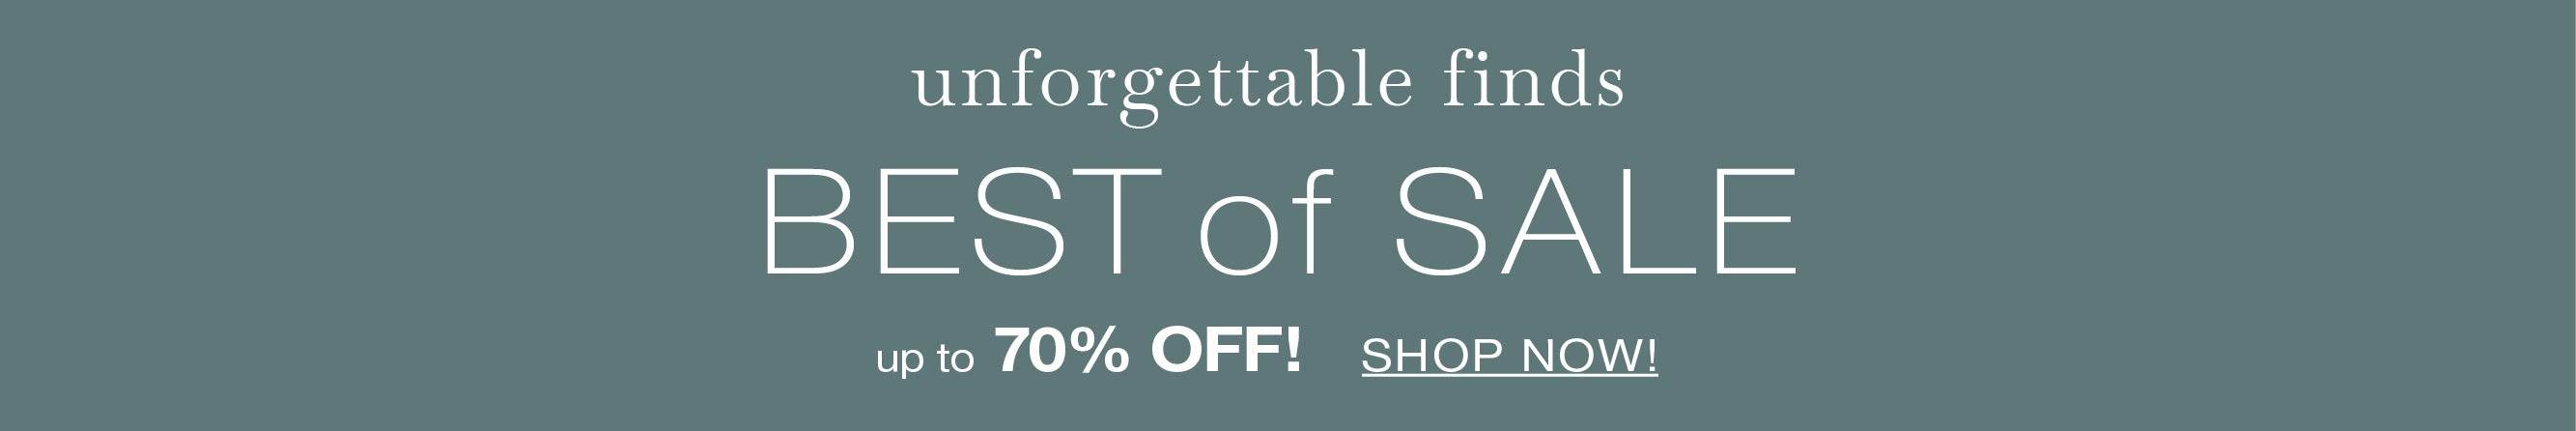 unforgettable finds BEST of SALE up to 70% OFF! SHOP NOW